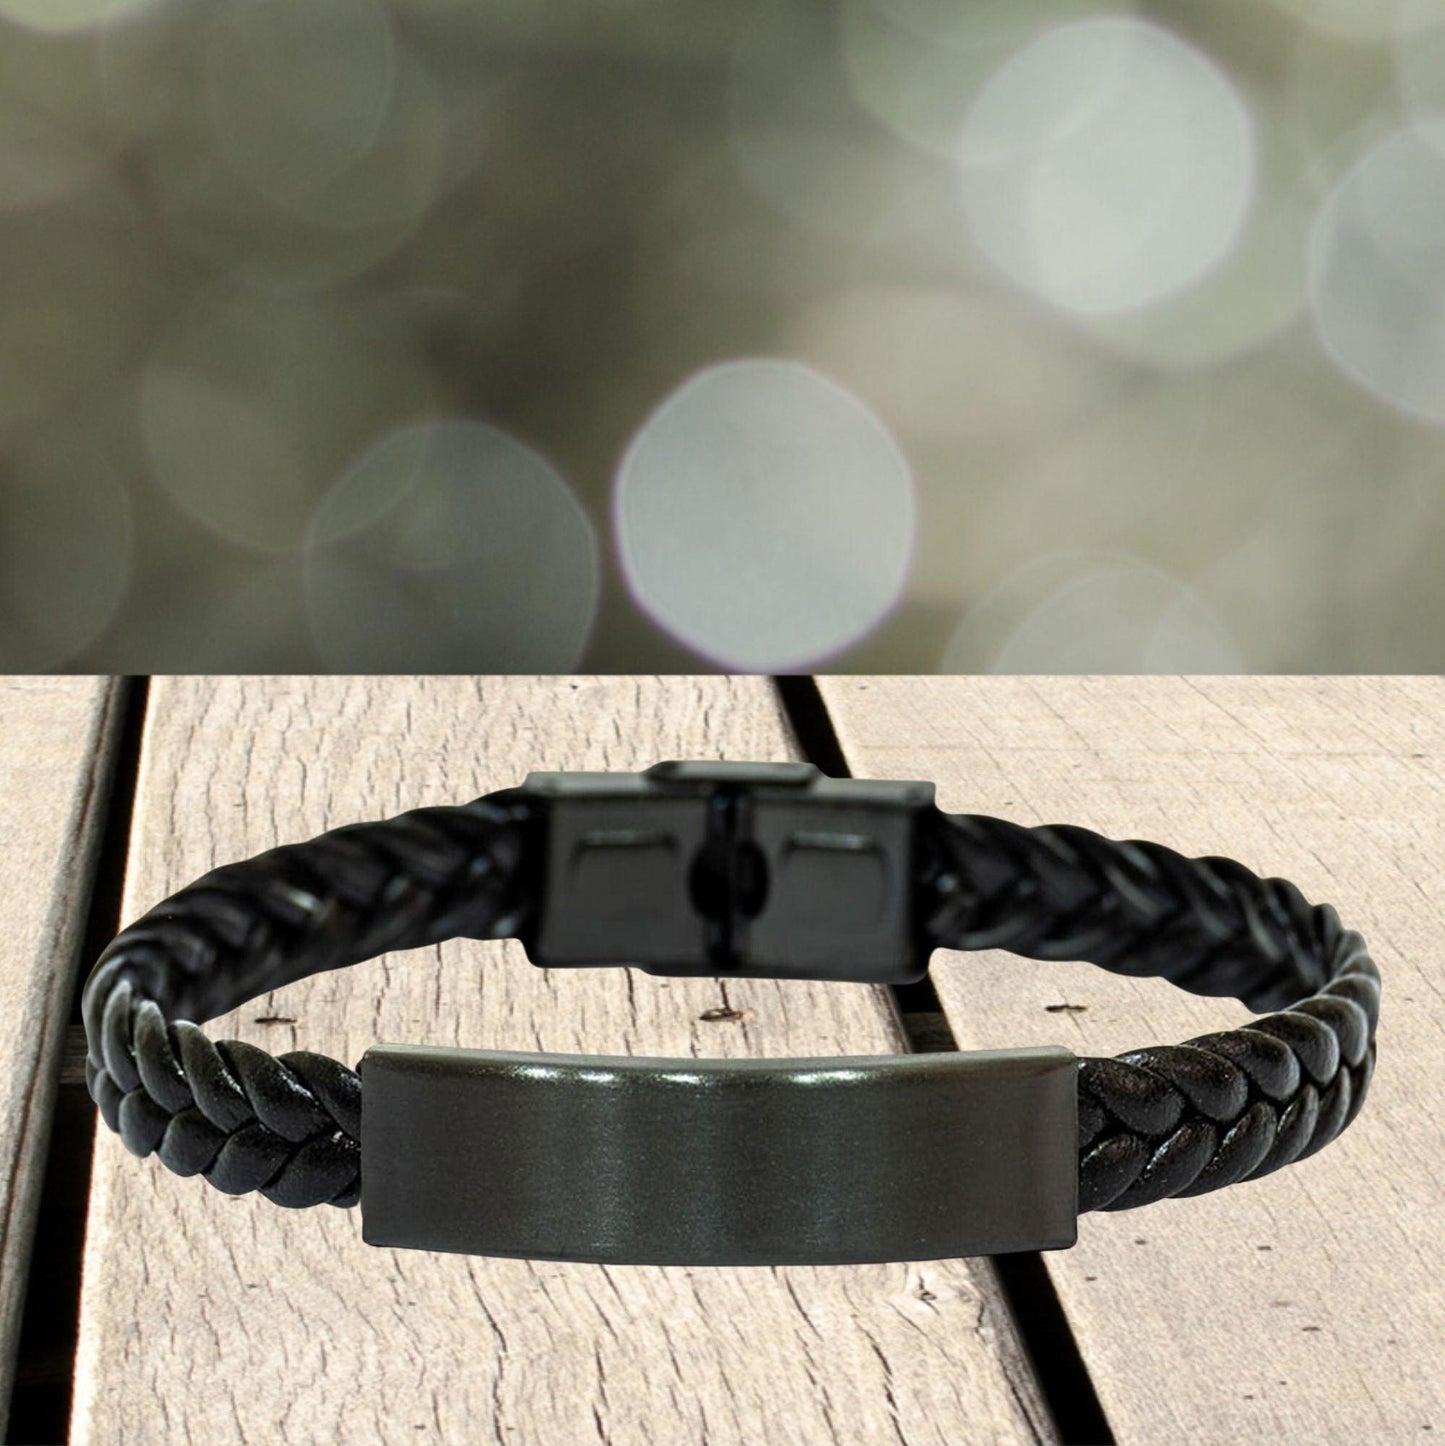 Remarkable Groundskeeper Gifts, Your dedication and hard work, Inspirational Birthday Christmas Unique Braided Leather Bracelet For Groundskeeper, Coworkers, Men, Women, Friends - Mallard Moon Gift Shop